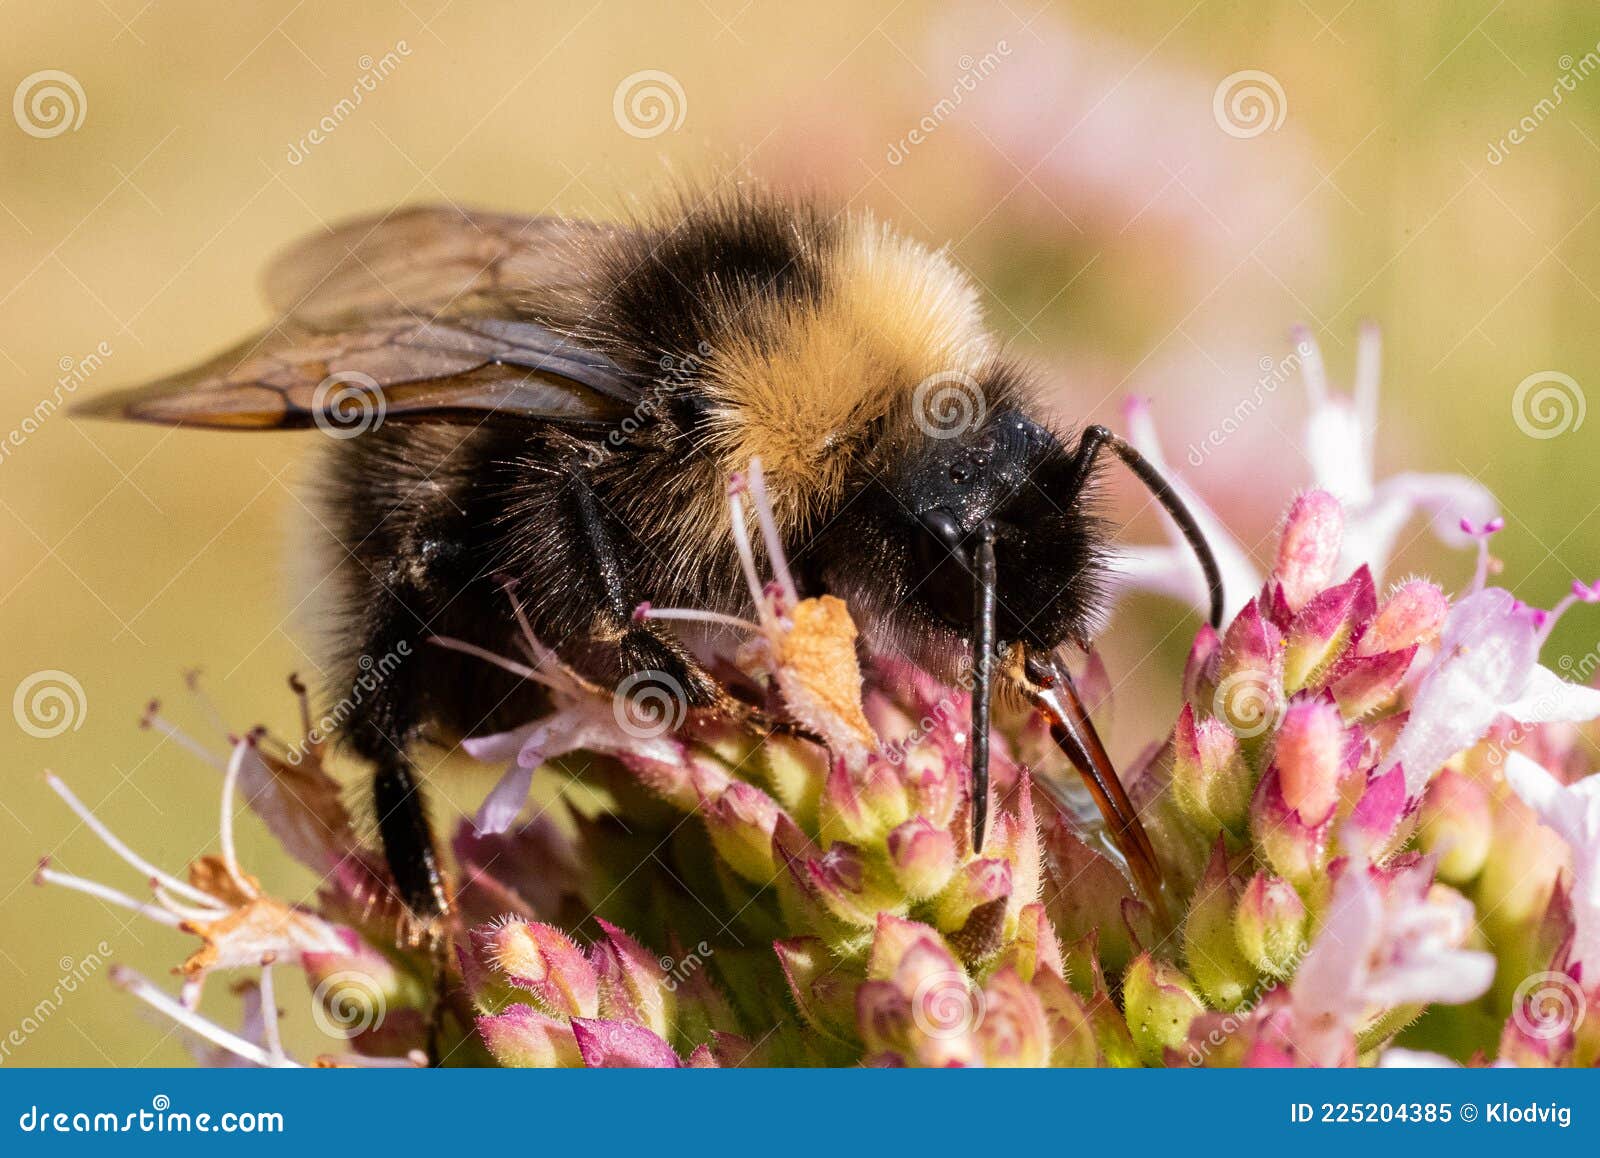 bombus subterraneus bumble bee lapping up nectar from flower